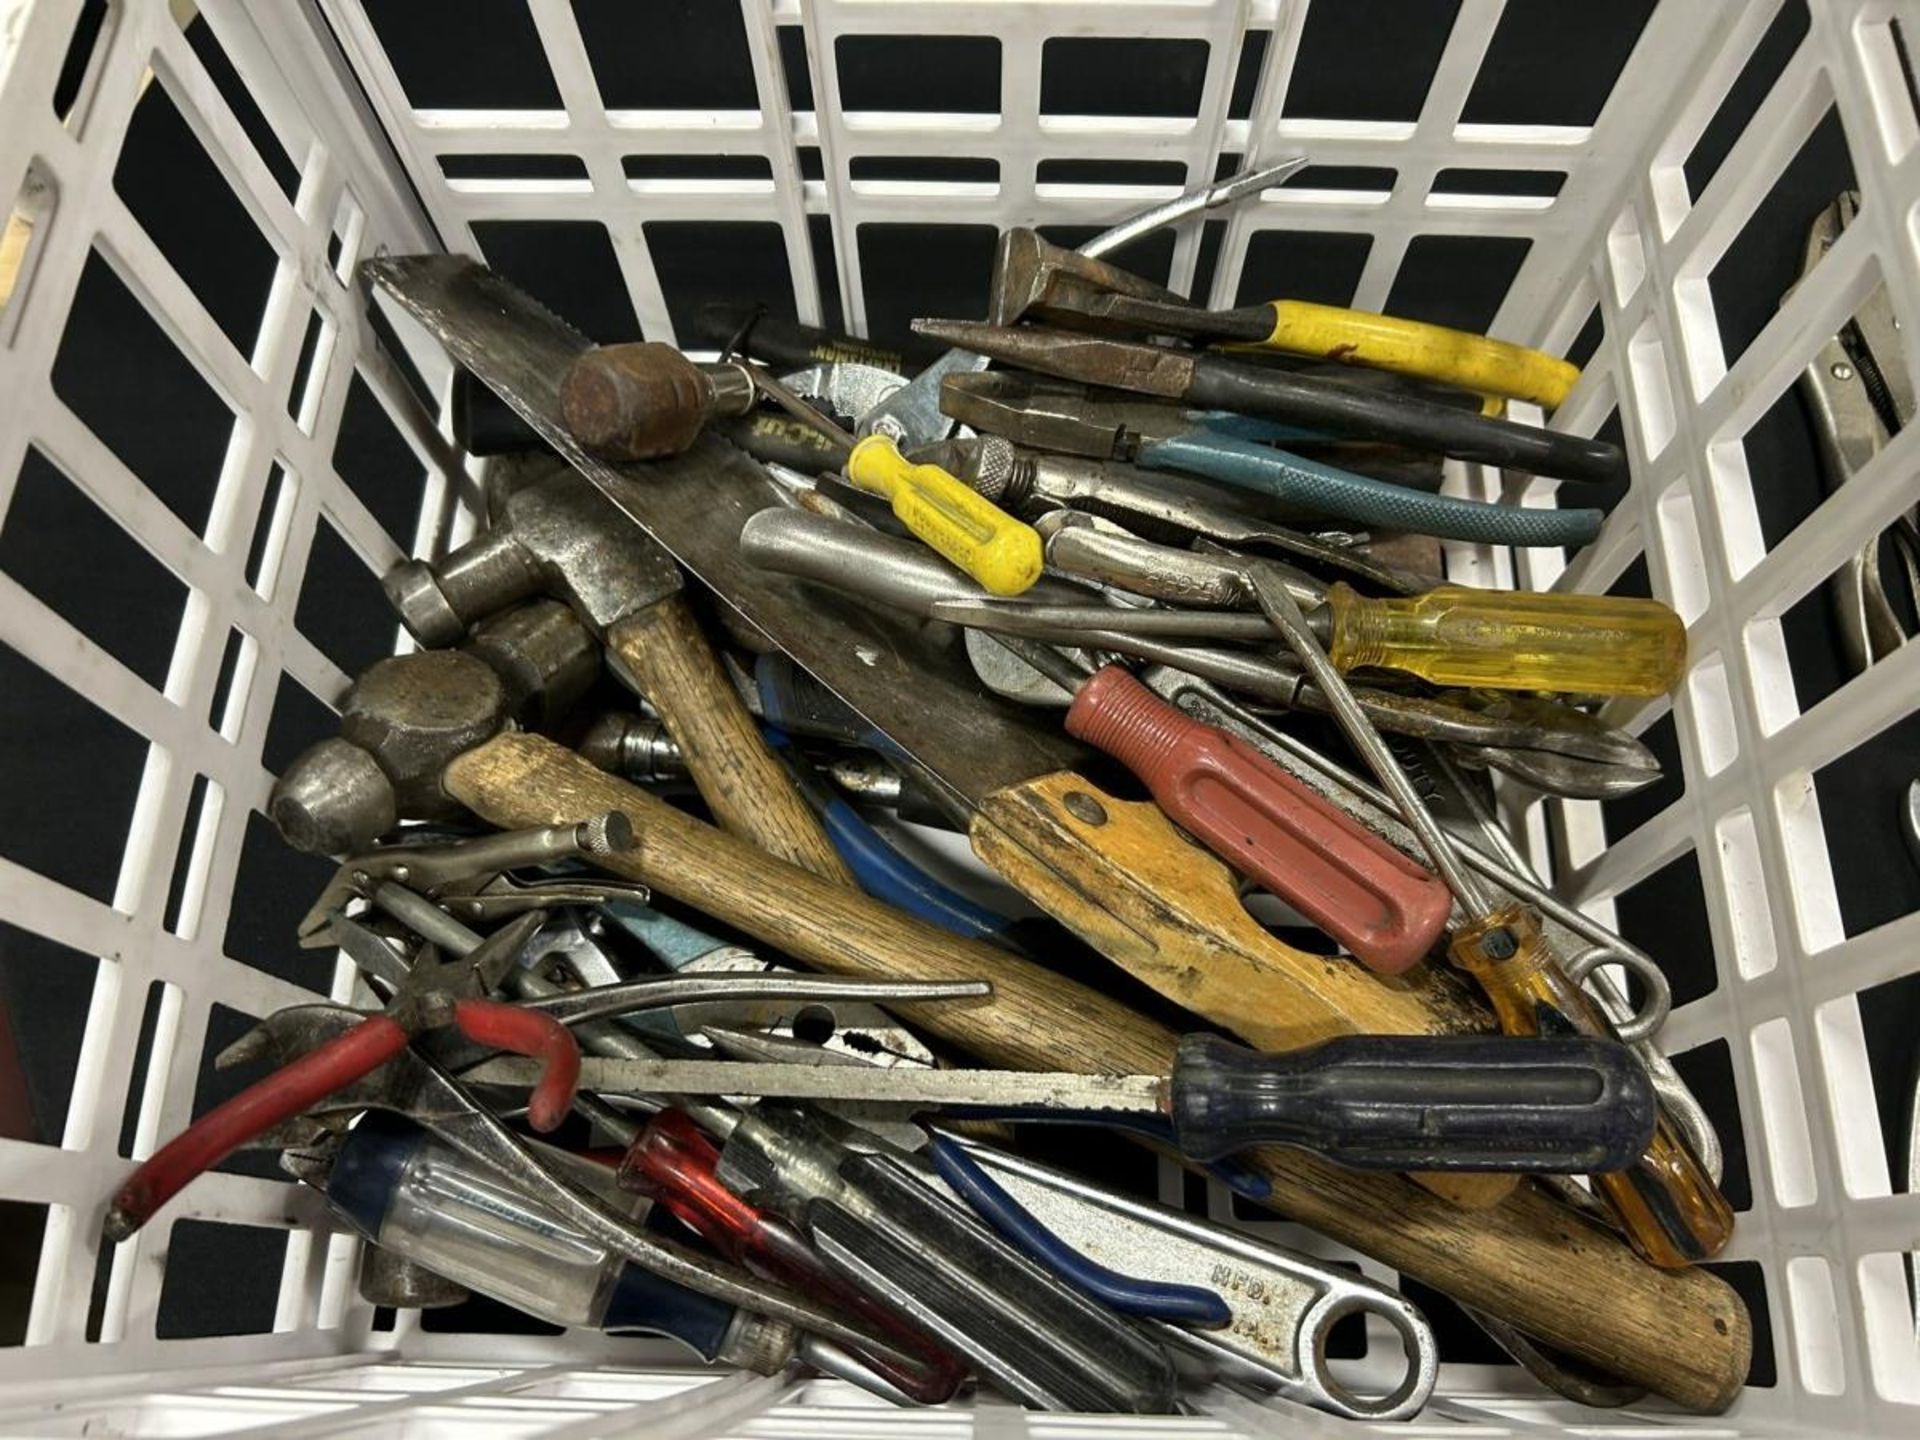 ASSORTED HAND TOOLS, CRESCENT WRENCHES, PLIERS, SCREWDRIVERS, ETC… - Image 3 of 5